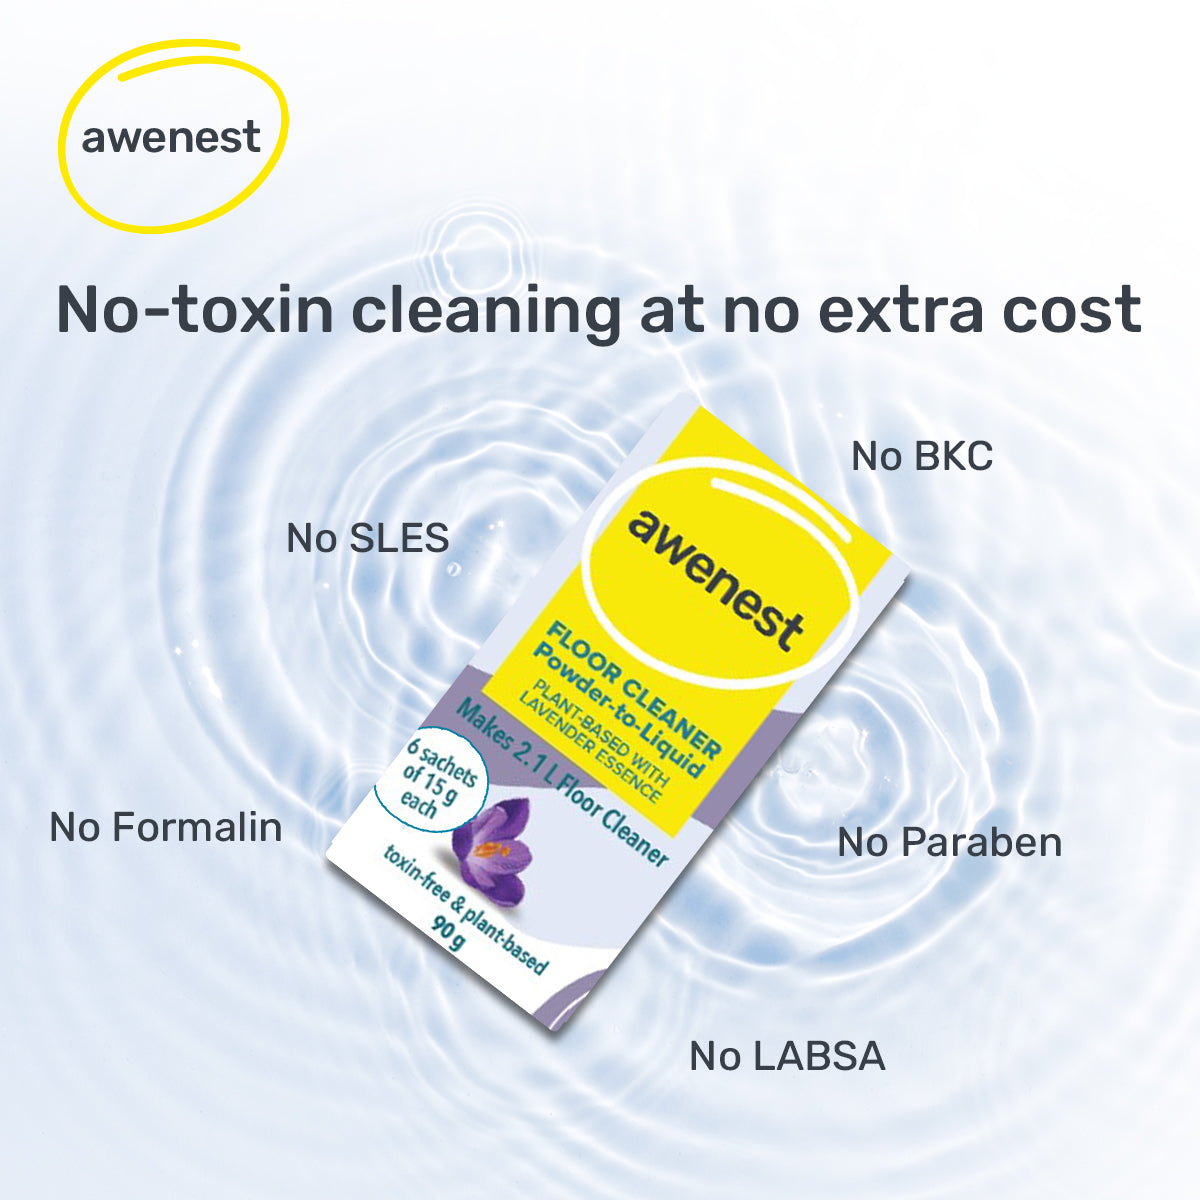 awenest toxin-free, plant-based powder to liquid floor cleaner with no labsa, sles, BKC, LABSA, formalin, paraben